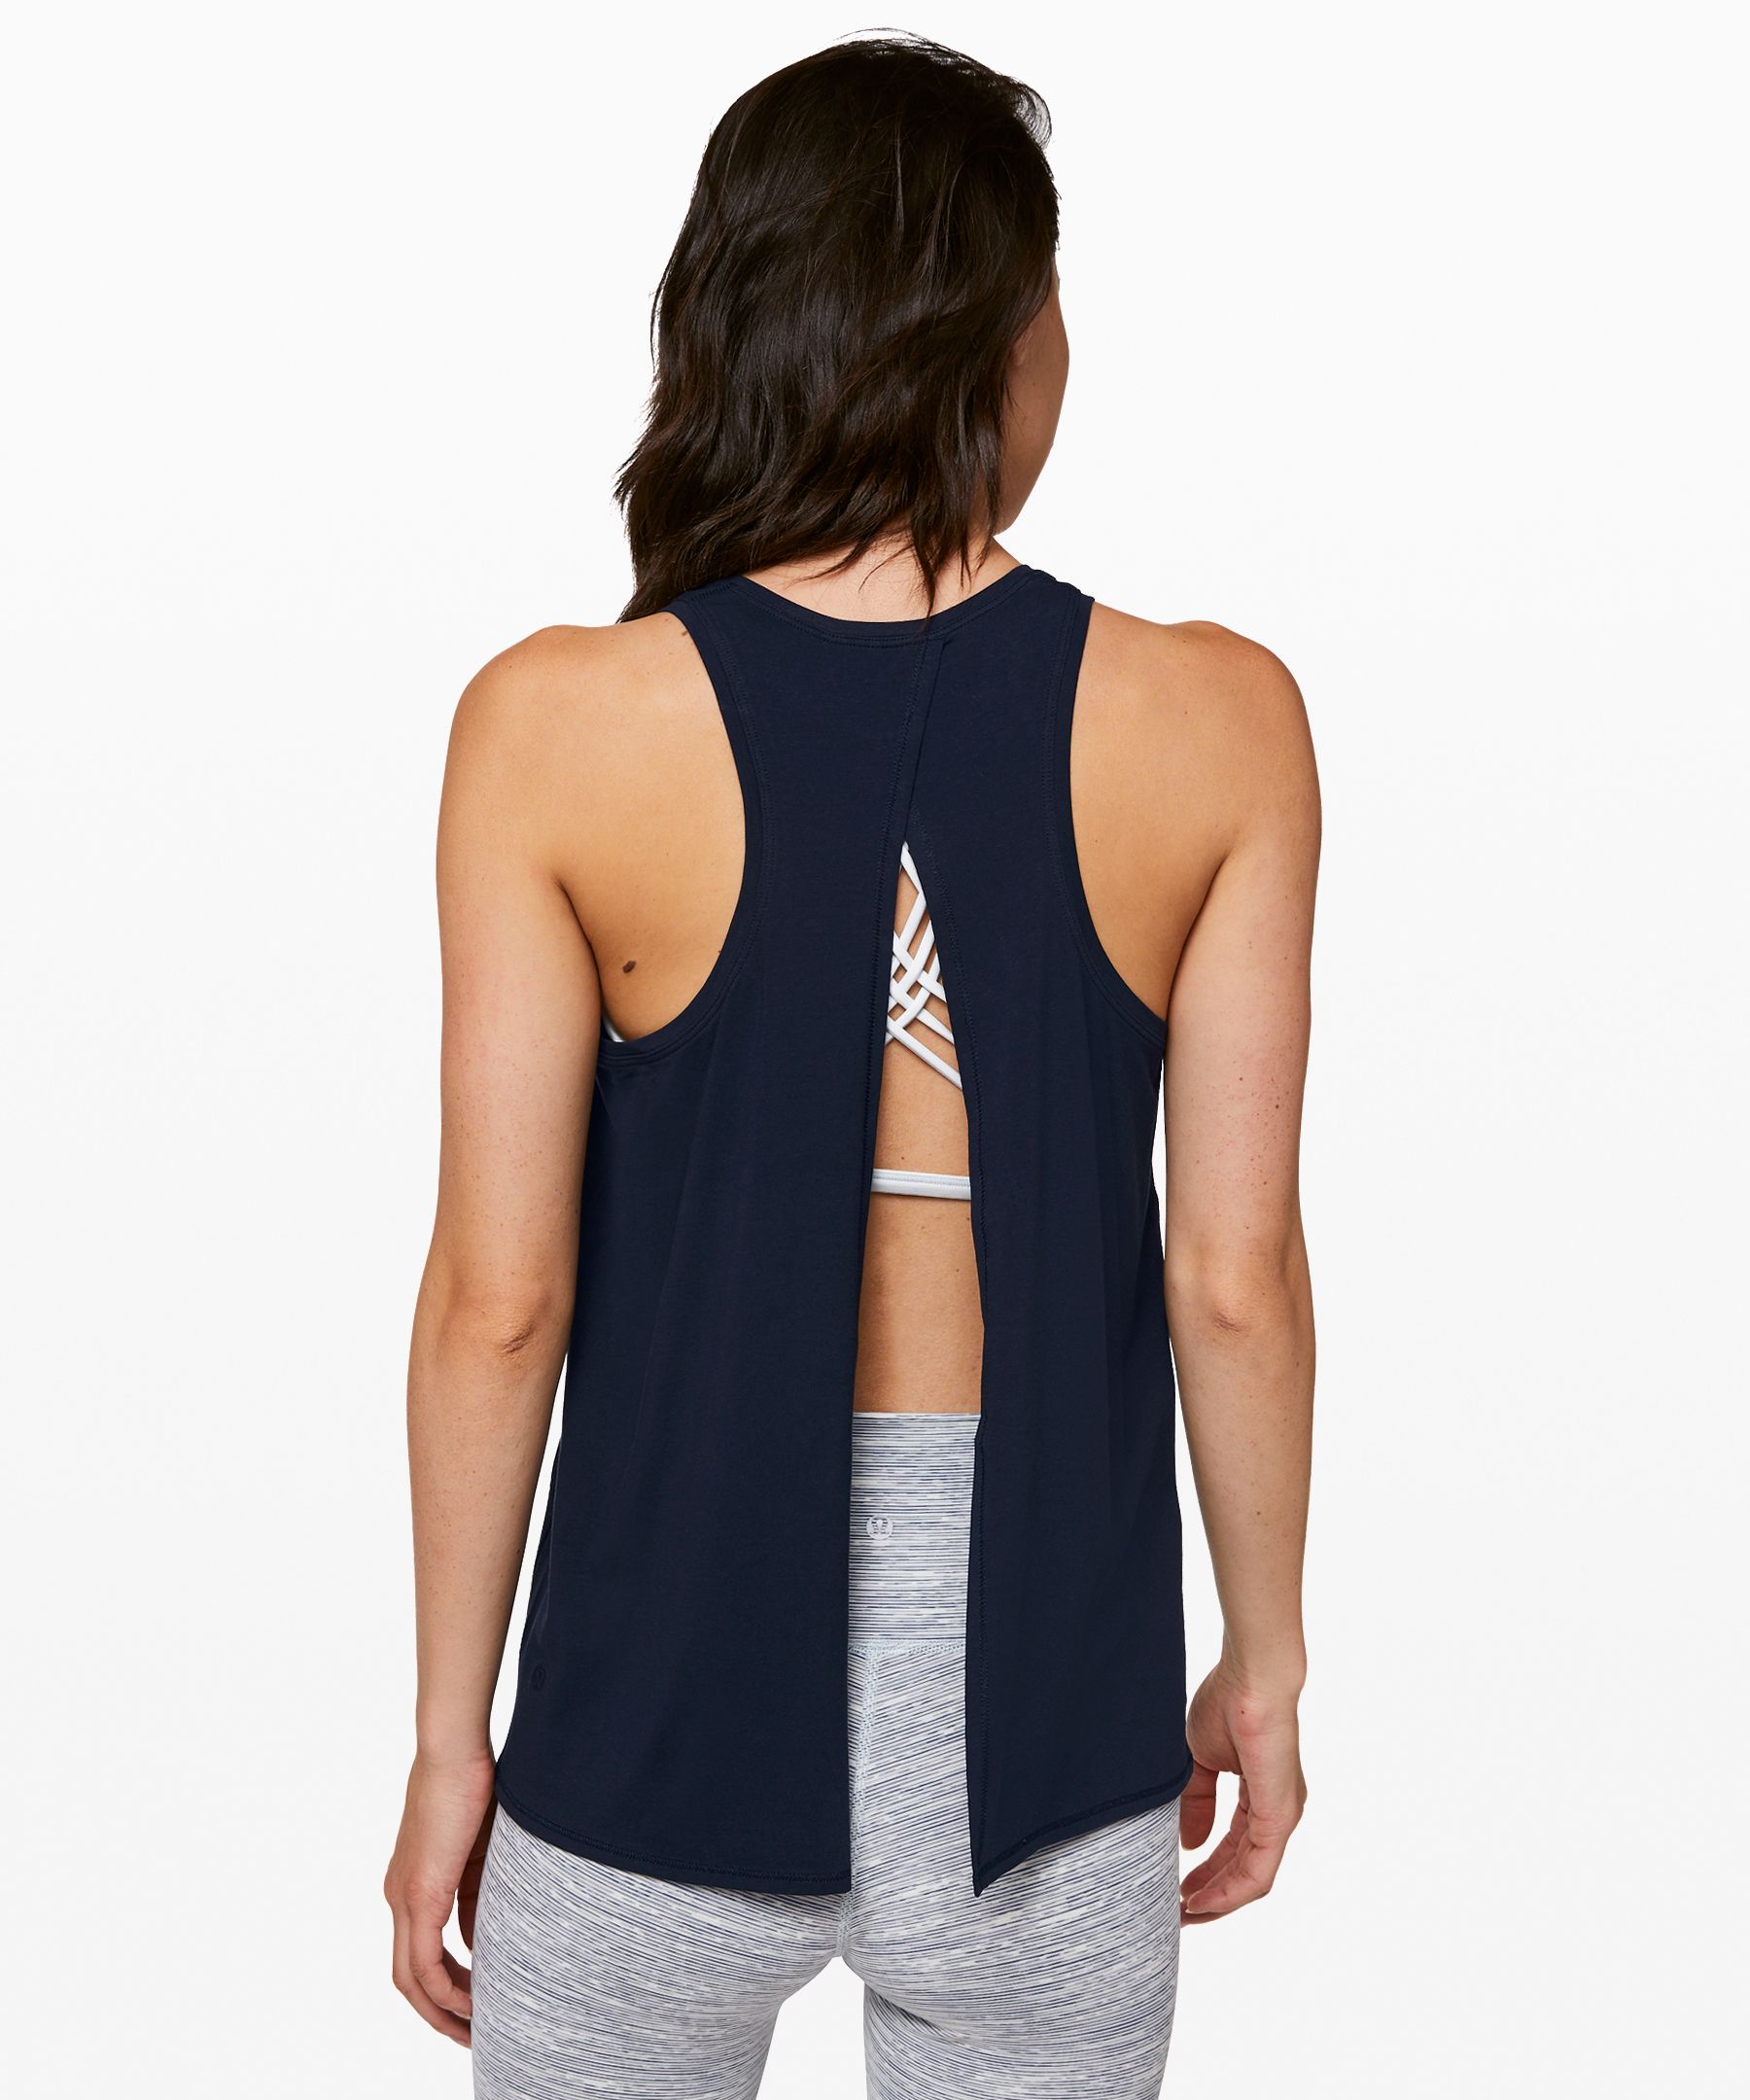 All Tied Up Tank Top | Women's Yoga 